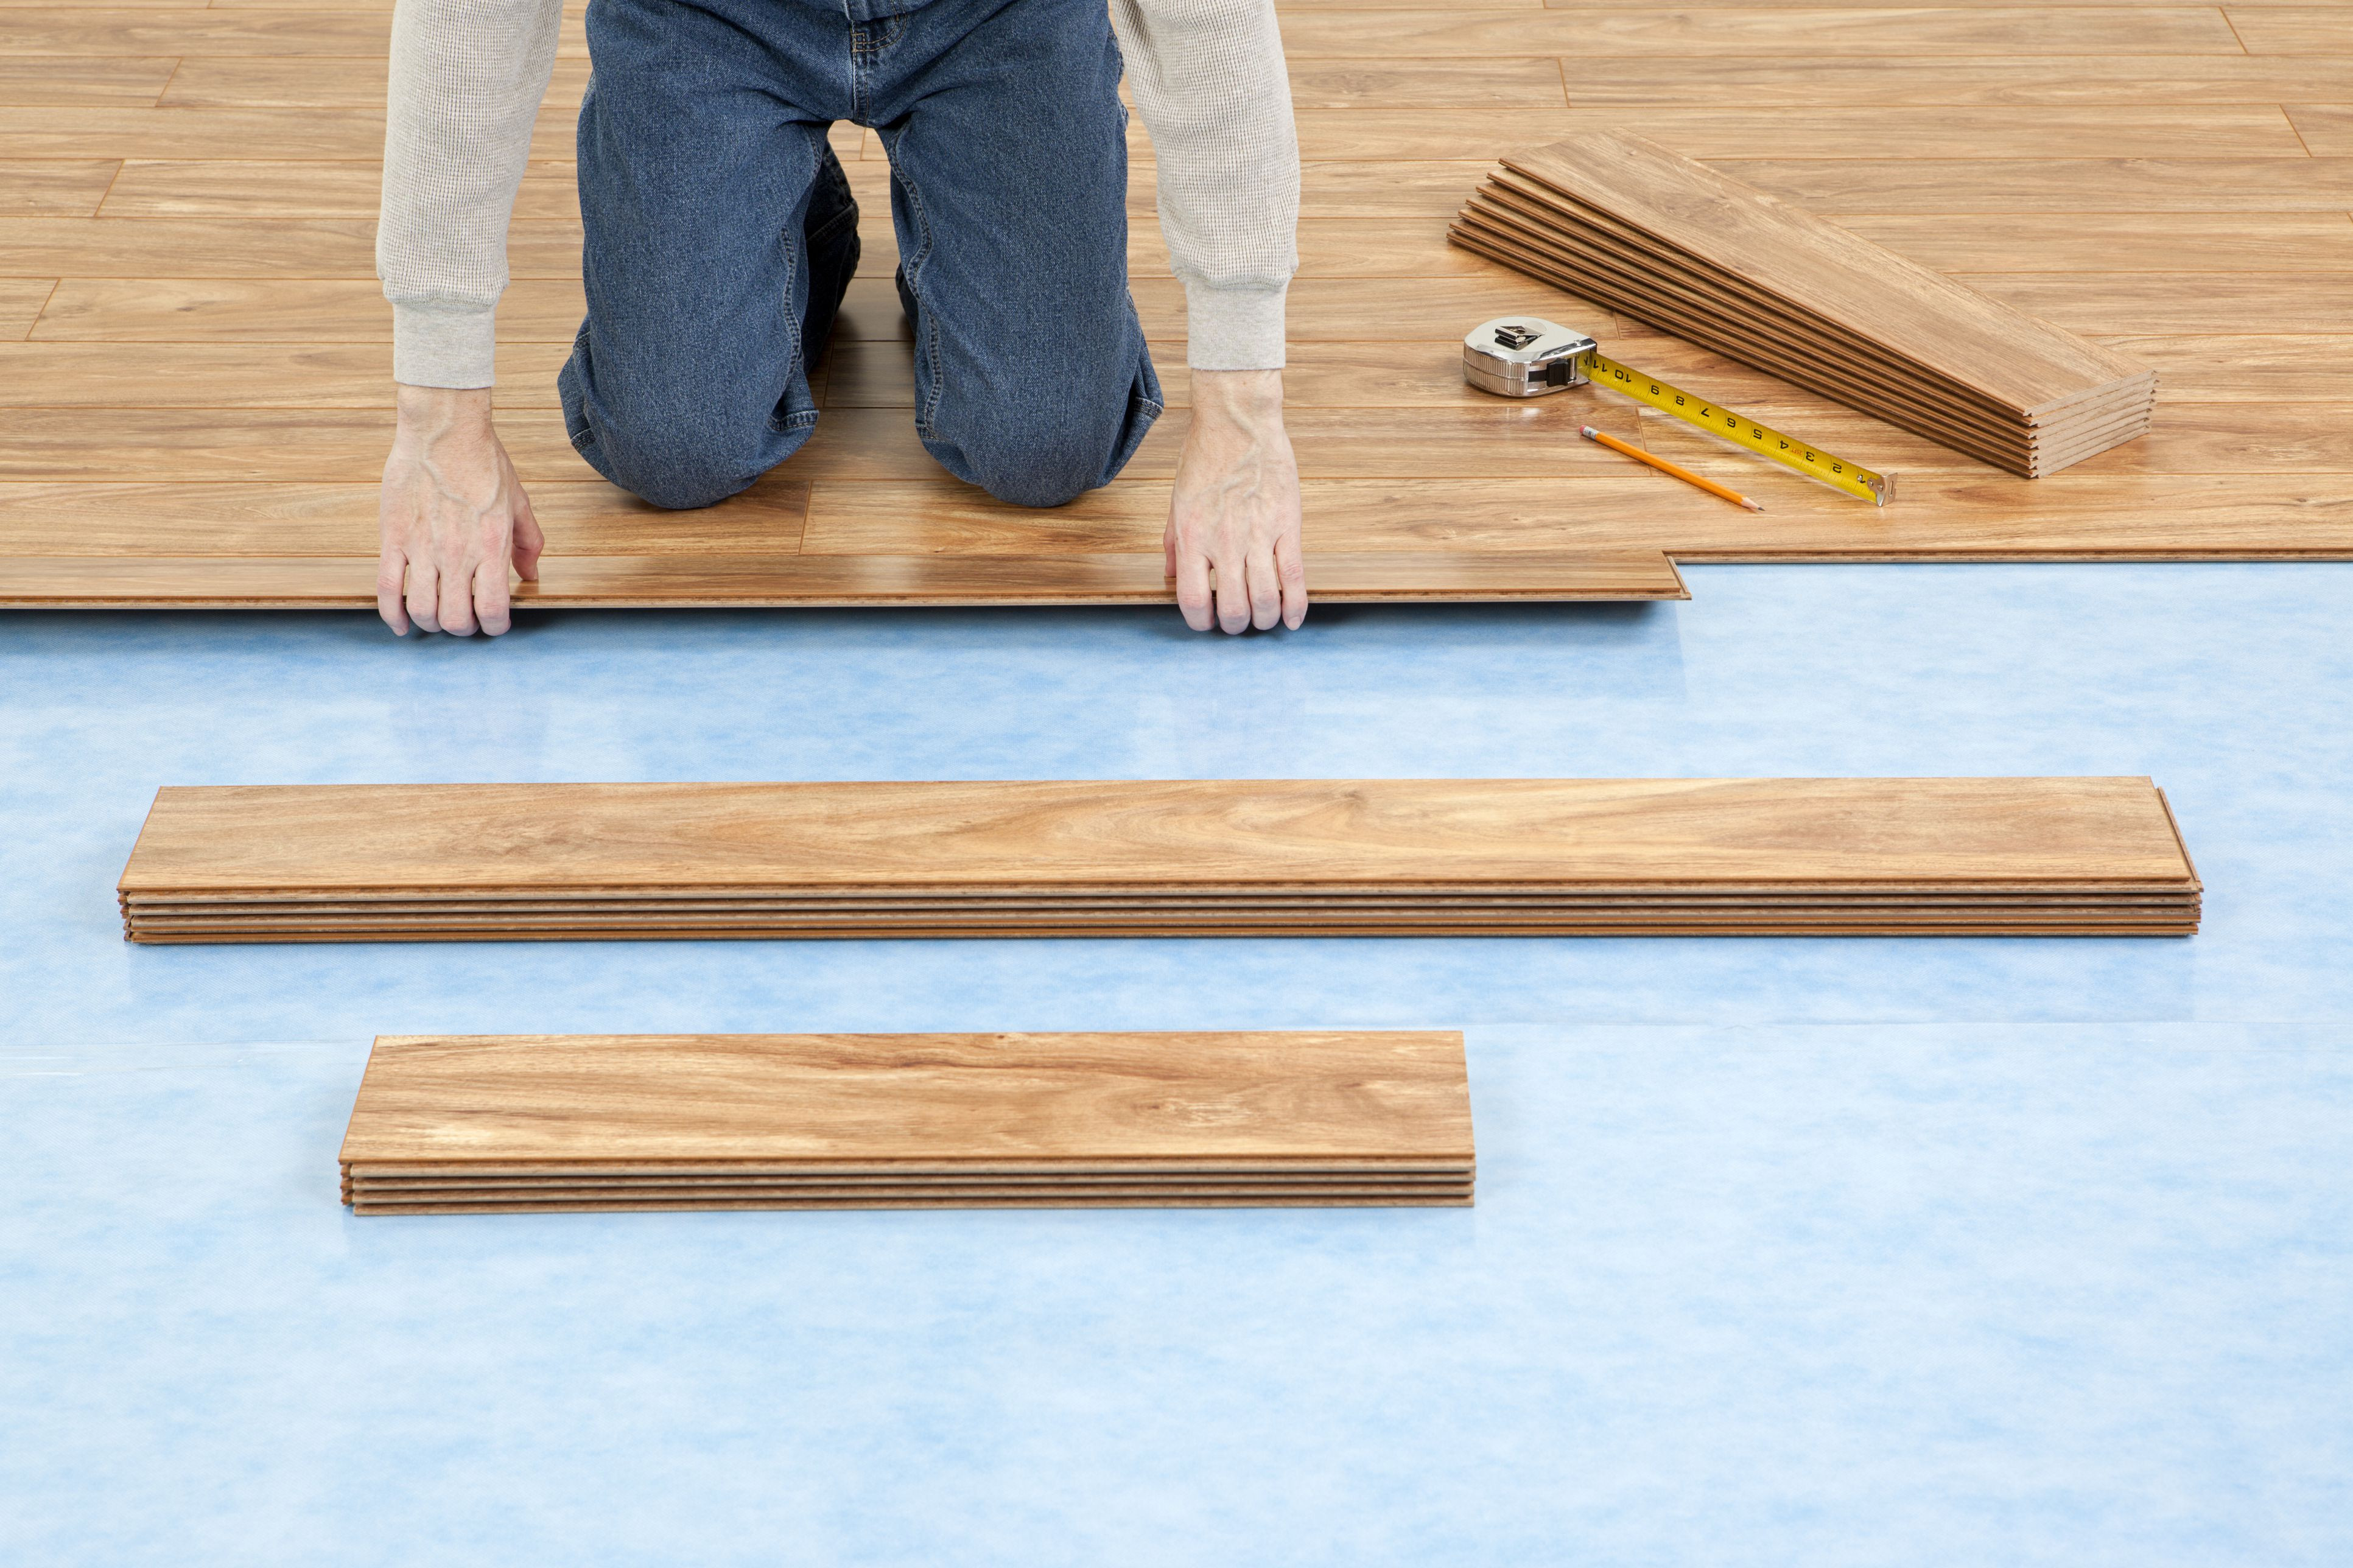 cost to install hardwood floors yourself of installing laminate flooring with attached underlayment within new floor installation 155283725 582735c03df78c6f6af8ac80